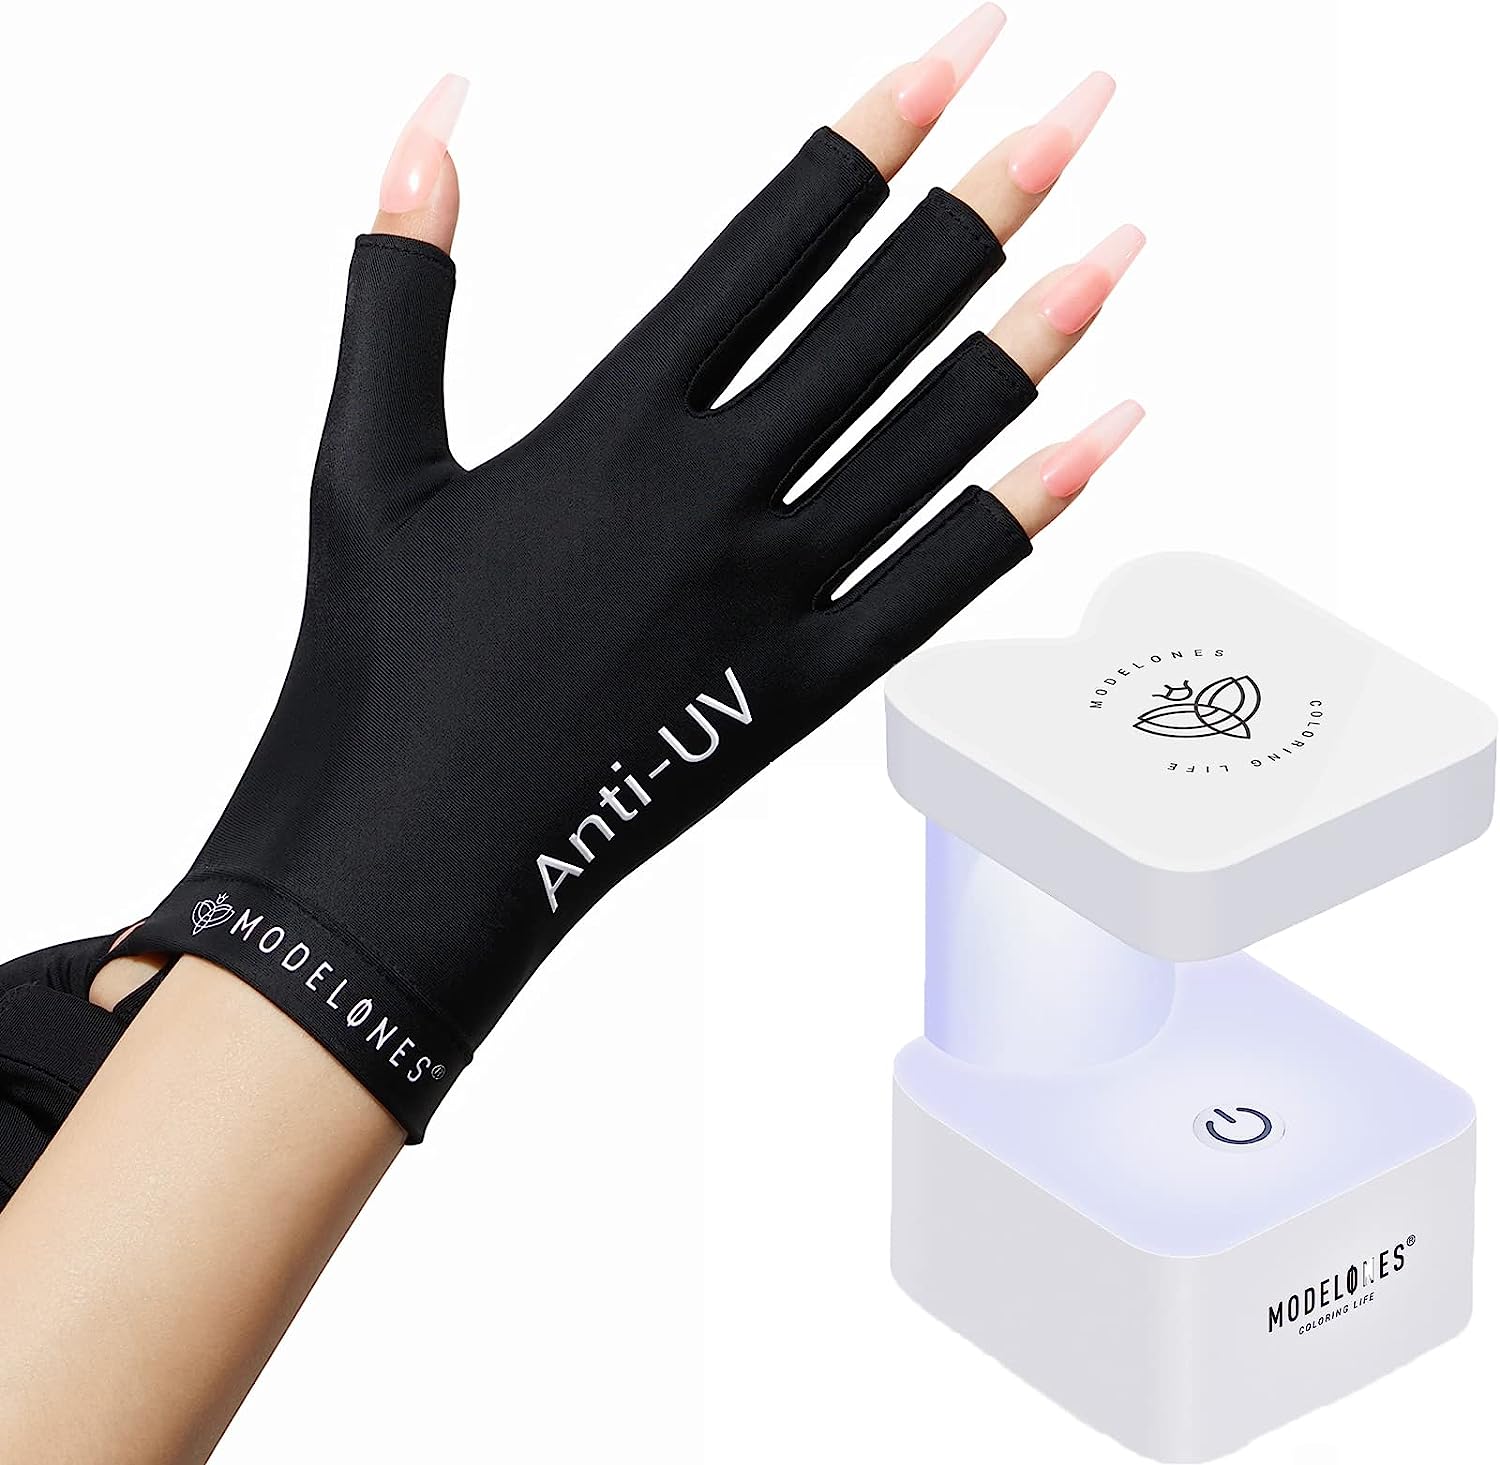 Anti-UV Light Glove With 8W Nail Lamp For Nails Salon Professional UPF 99+【US ONLY】